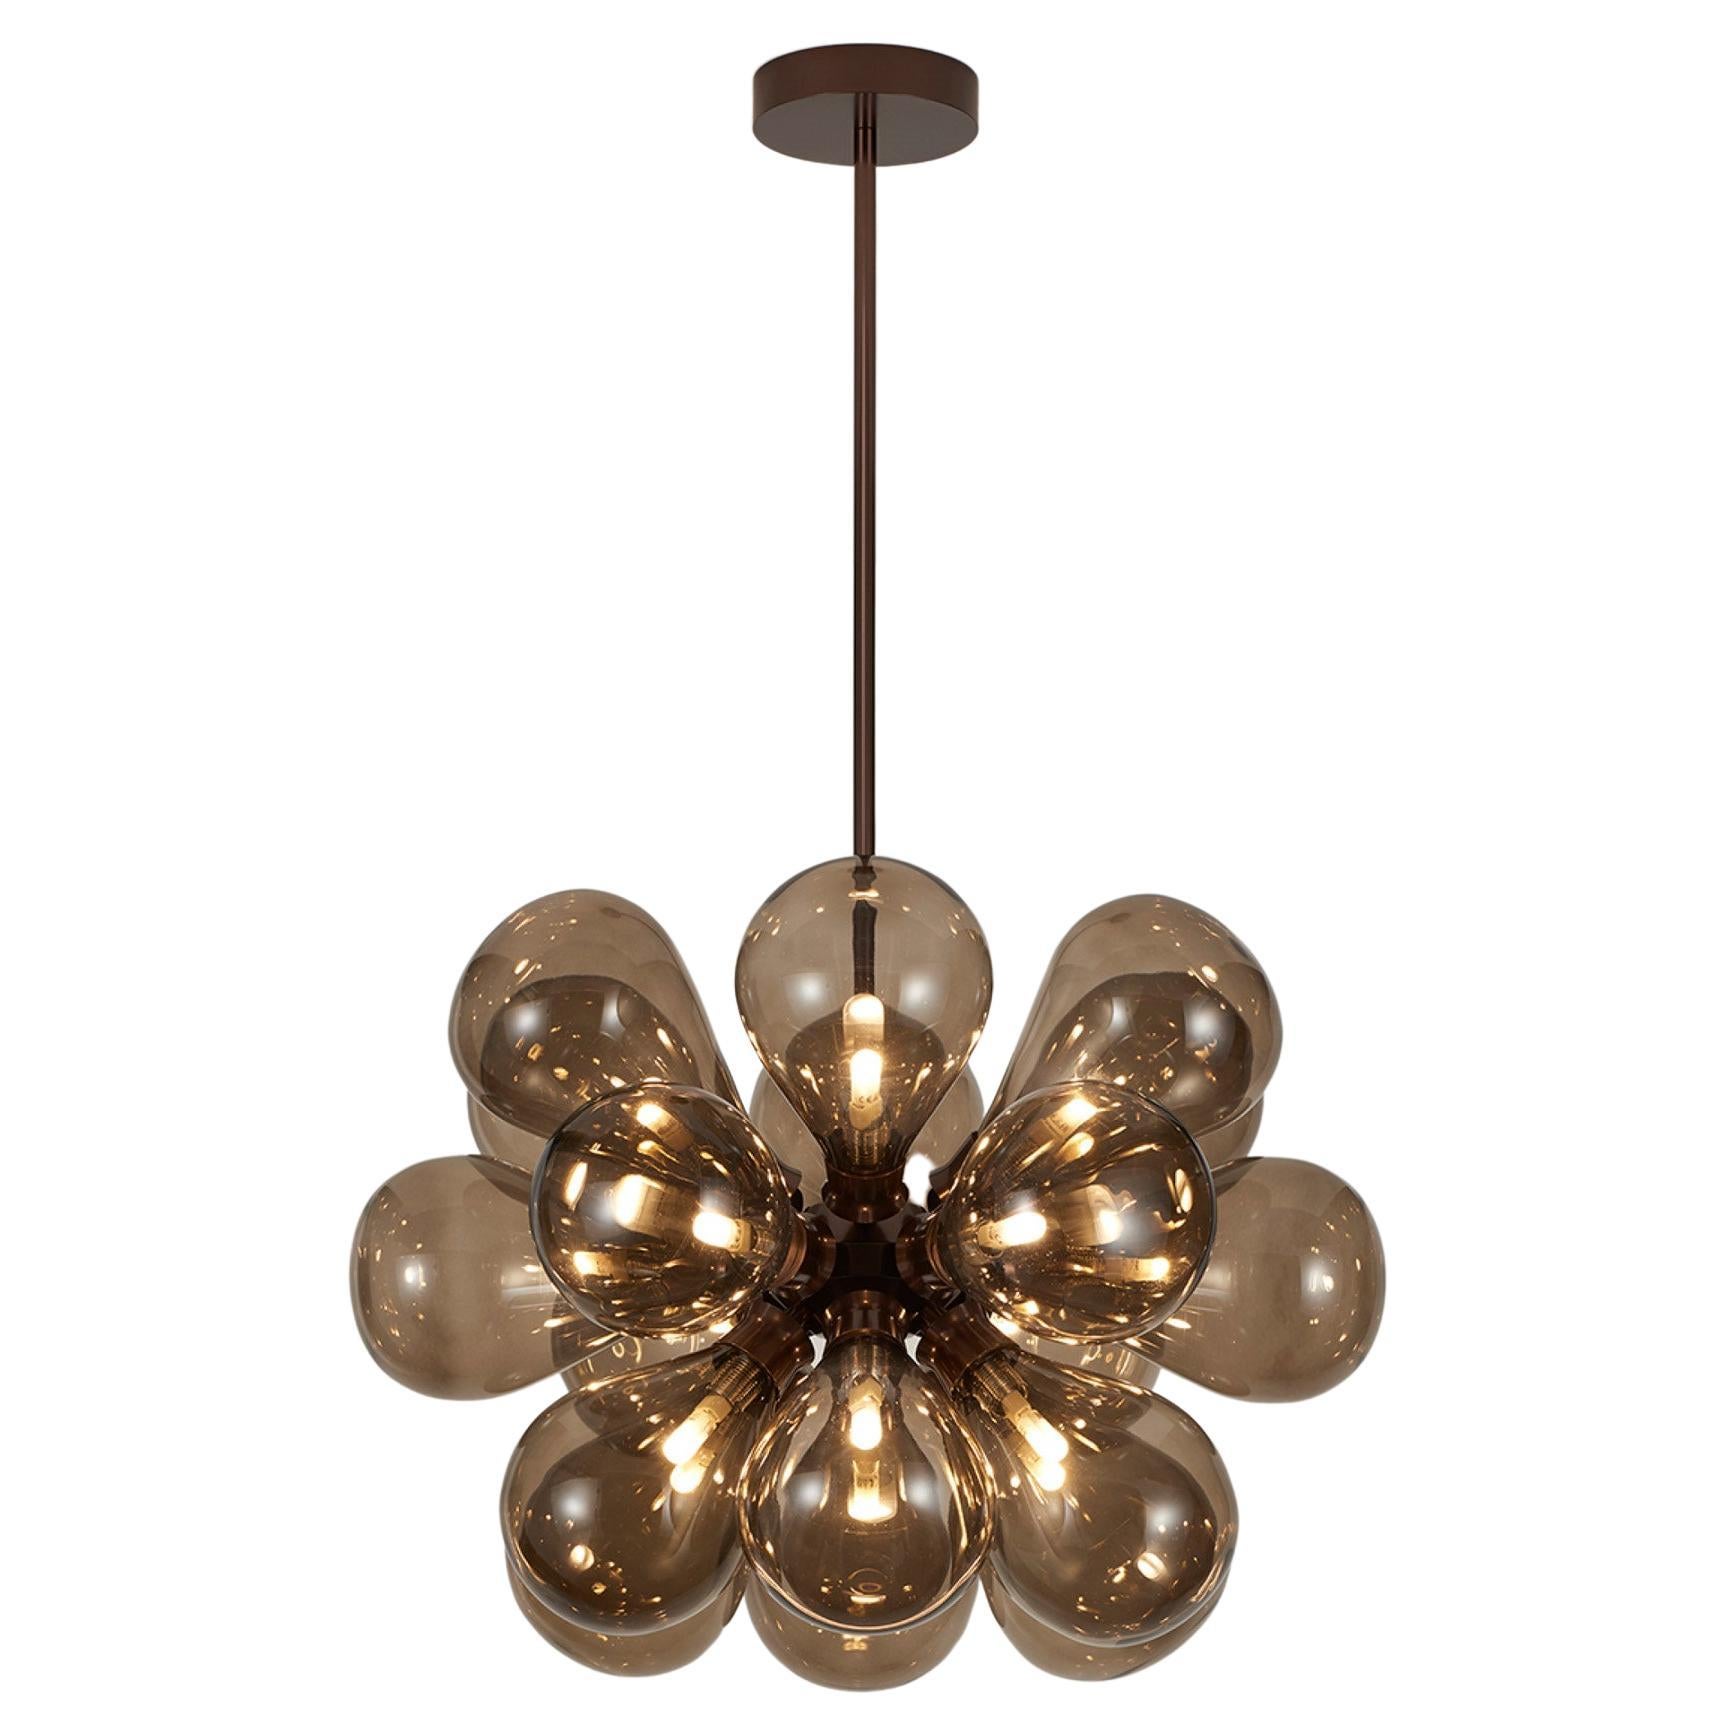 Cintola Maxi Pendant in Satin Bronze with 18 Handblown Bronze Glass Globes For Sale